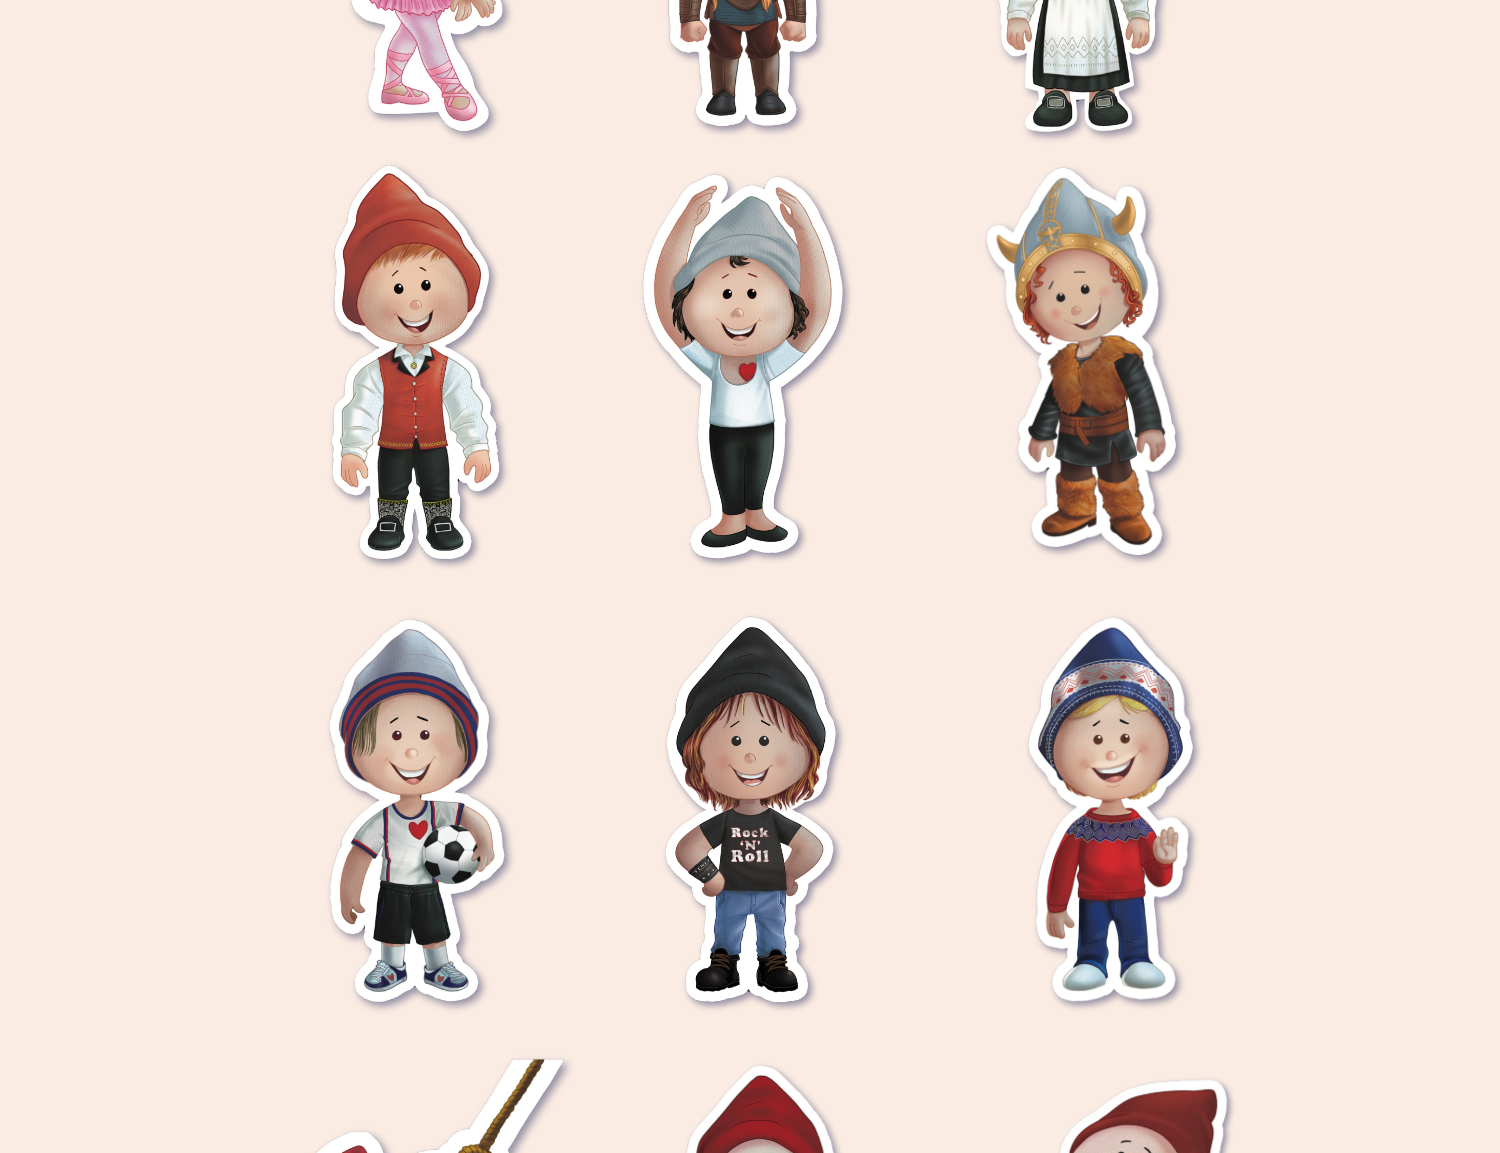 A colorful array of twelve children's stickers showcasing a diverse set of characters and costumes. The stickers include girls, boys, and gender-neutral figures, some dressed in traditional Norwegian attire, others as a Viking, a ballet dancer, a soccer player, a rock and roll enthusiast, and gnomes engaging in various activities. Each sticker is detailed and vibrant against a soft, neutral background.